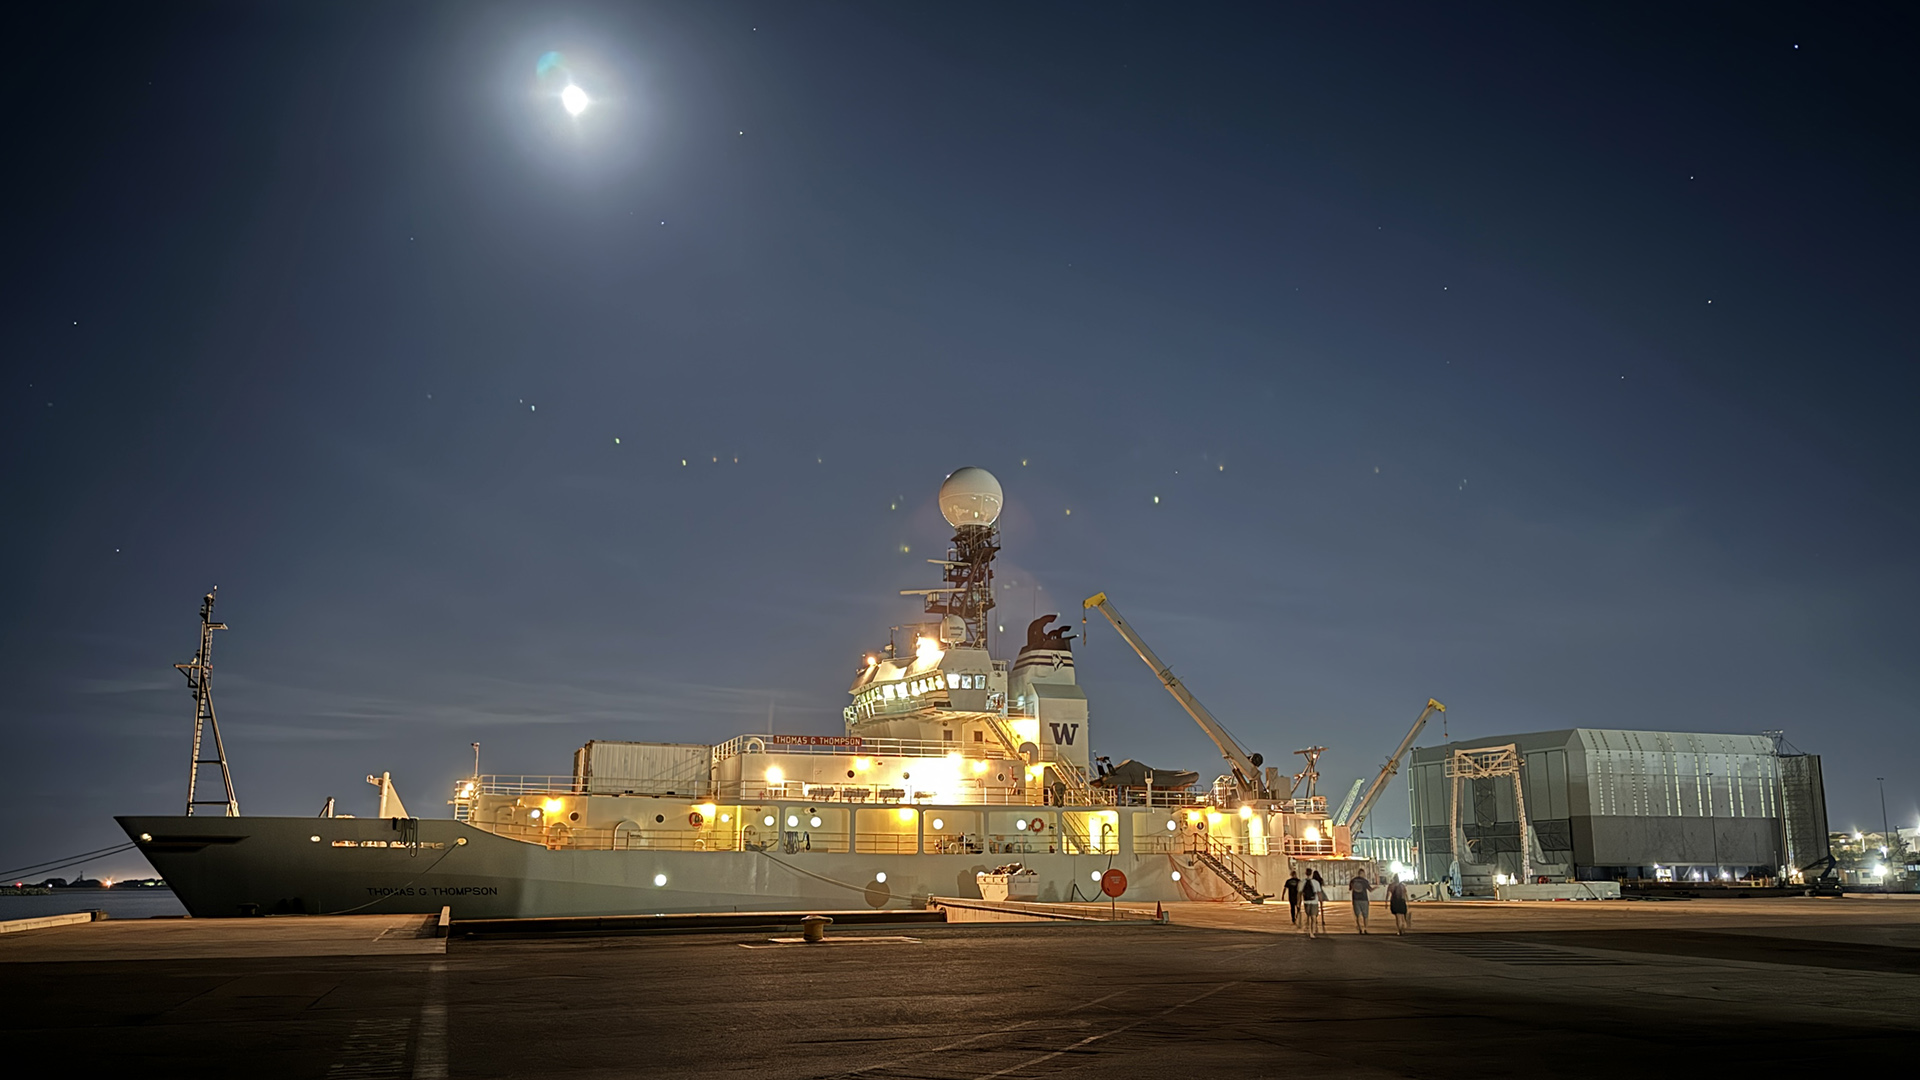 R/V Thomas G Thomson at the dock under a bright moon, as members of the science team board the ship